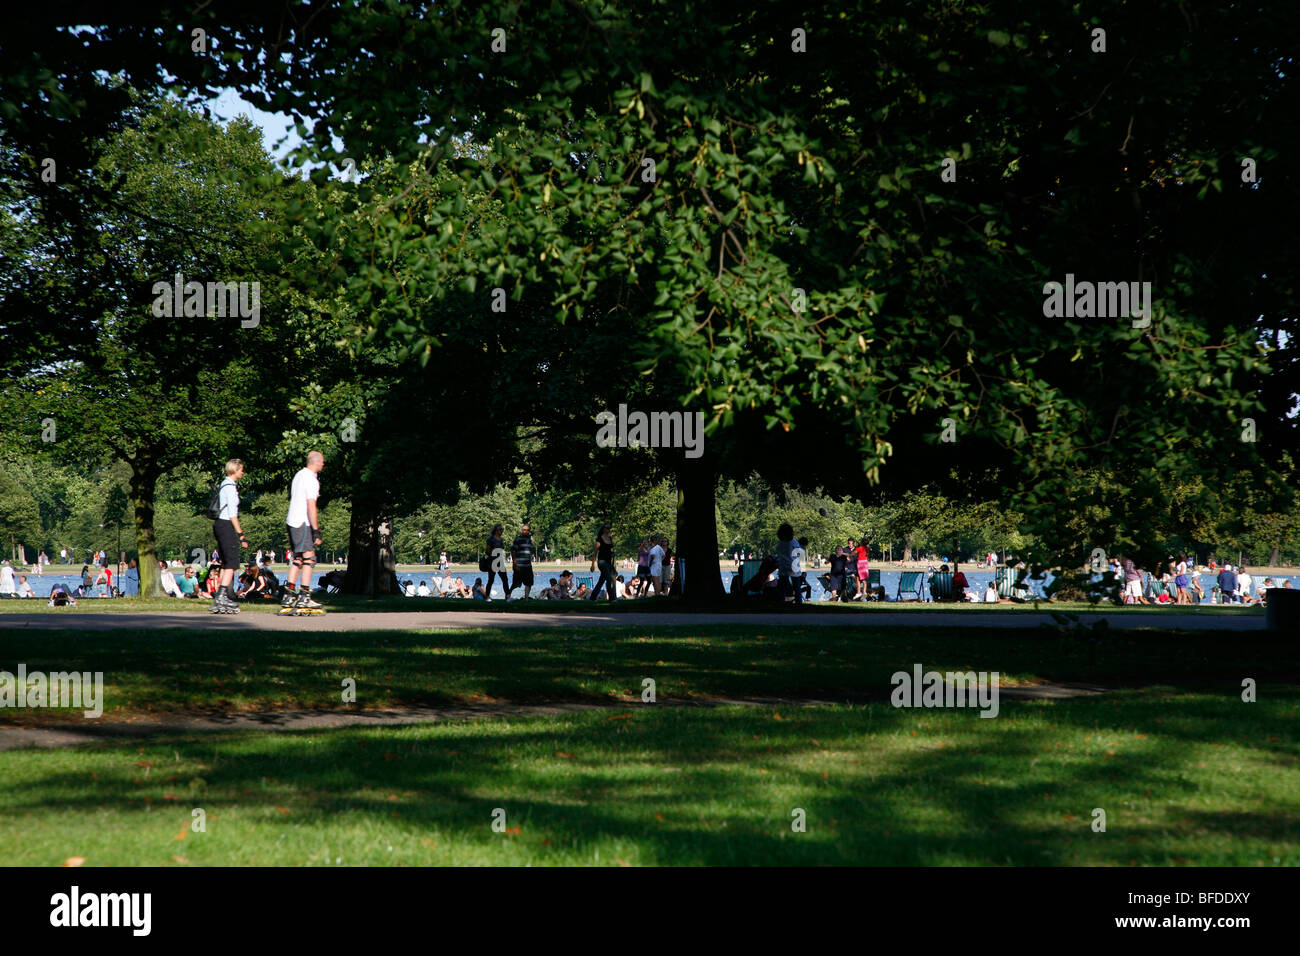 Heatwave Kensington Gardens London High Resolution Stock Photography and  Images - Alamy